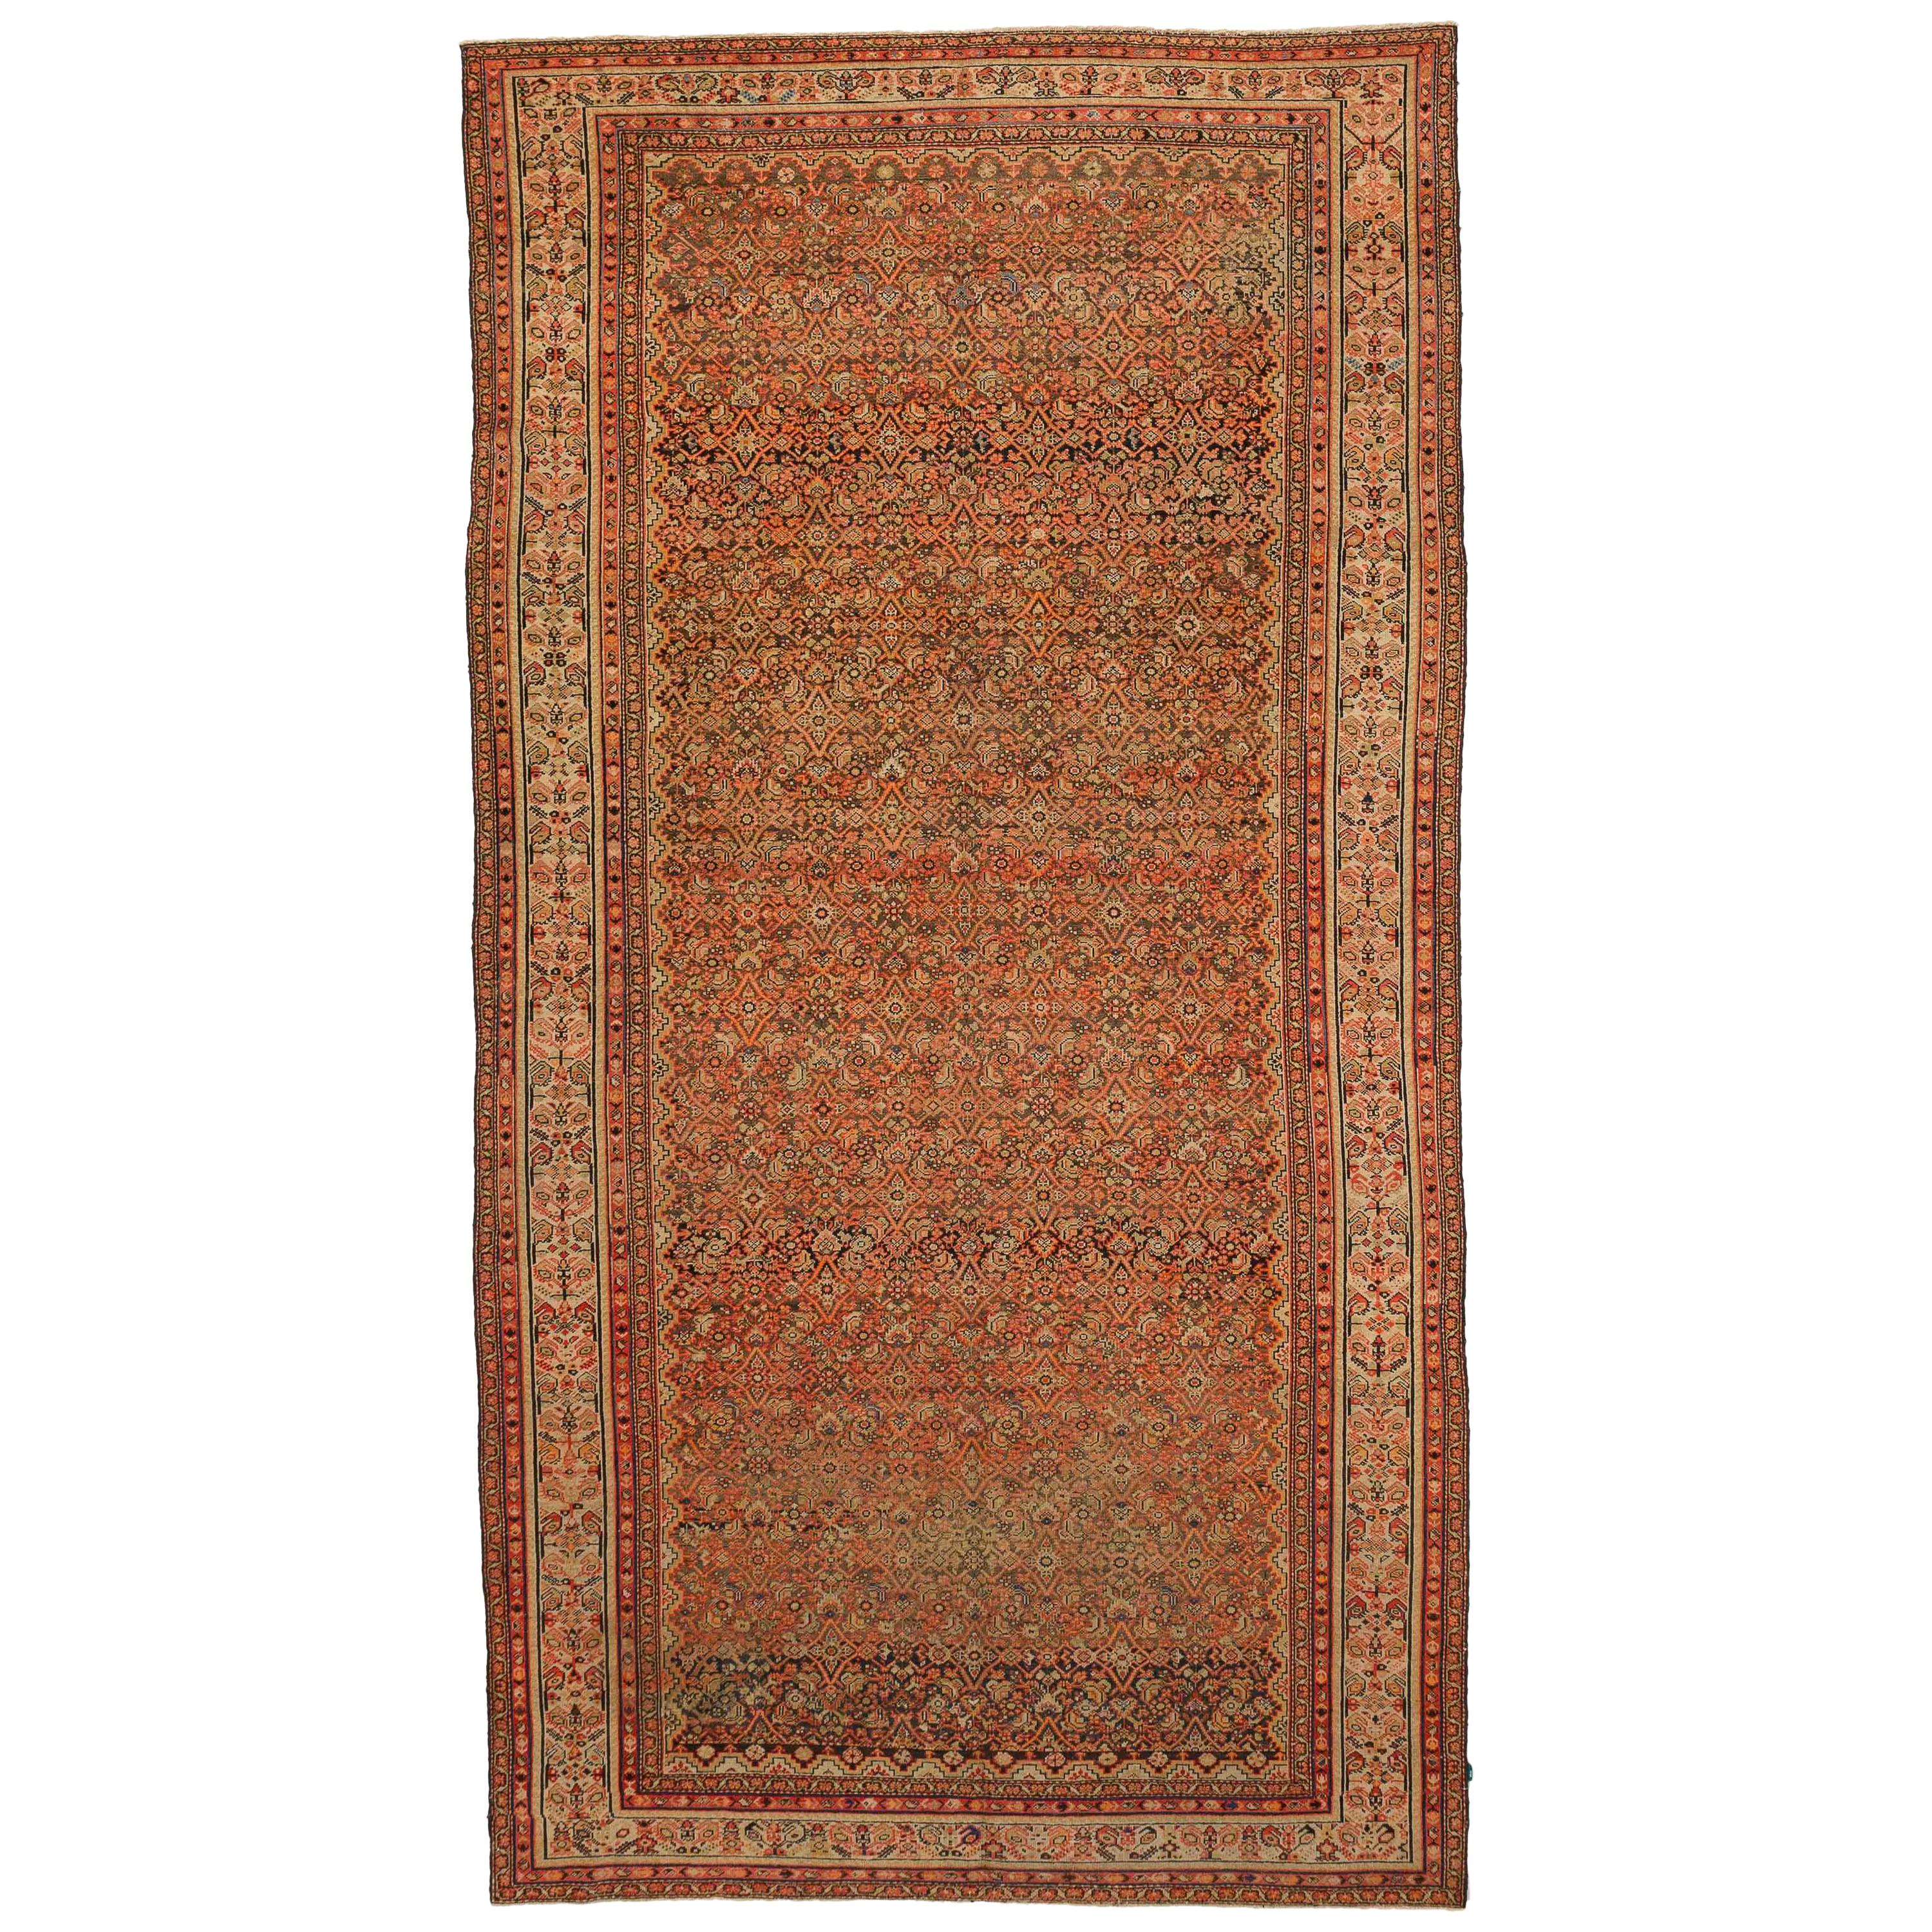 Antique Persian Rug Malayer Style with Ornate Stars & Flowers Pattern circa 1930 For Sale